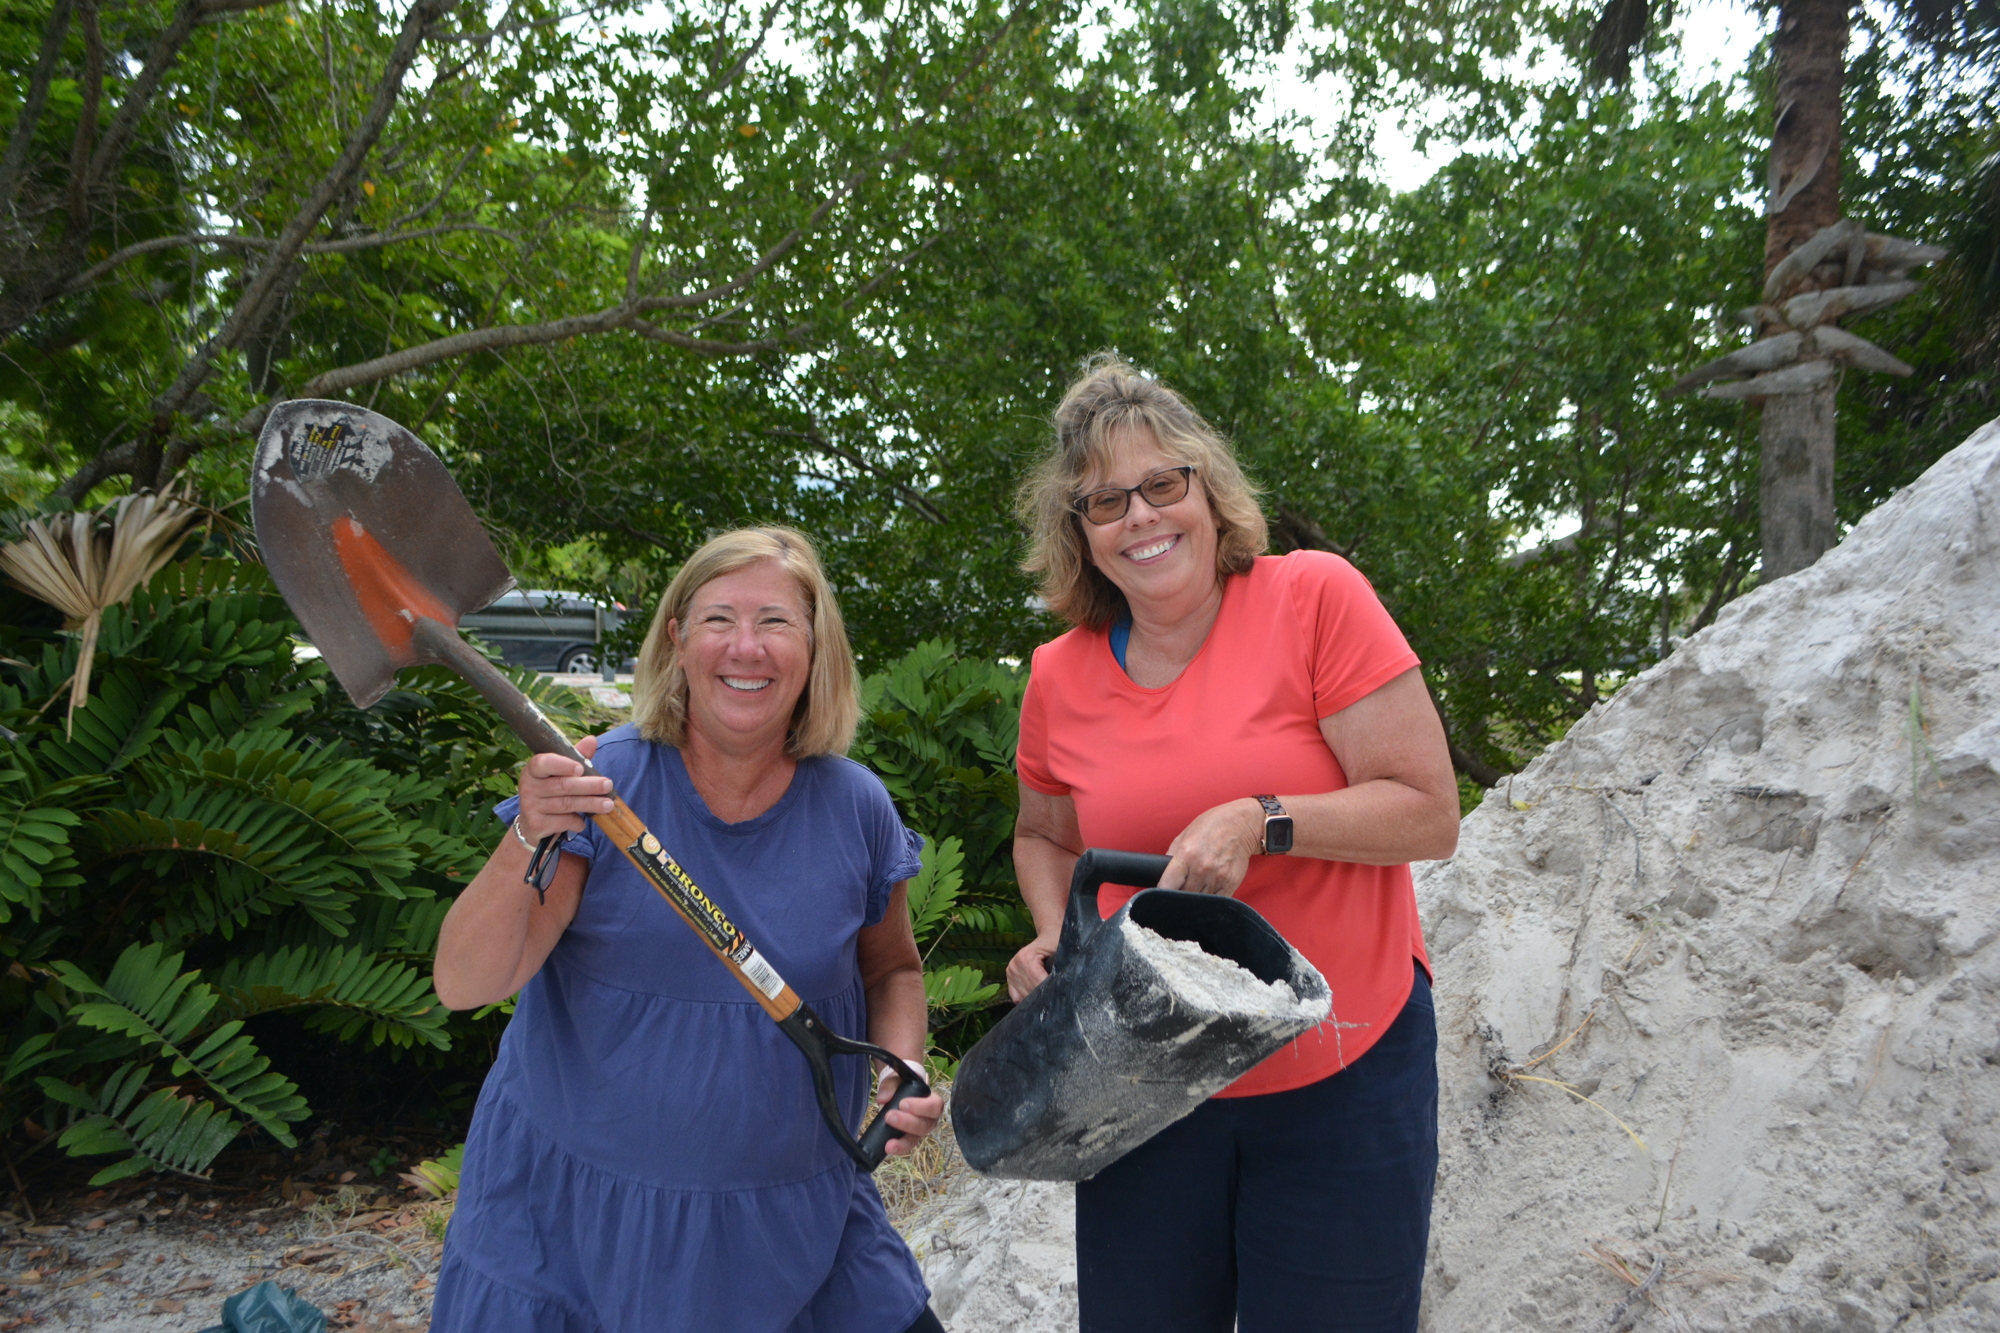 Marti Wood and Starr Shafer work together to fill sandbags ahead of hurricane. (Photo by Lauren Tronstad)